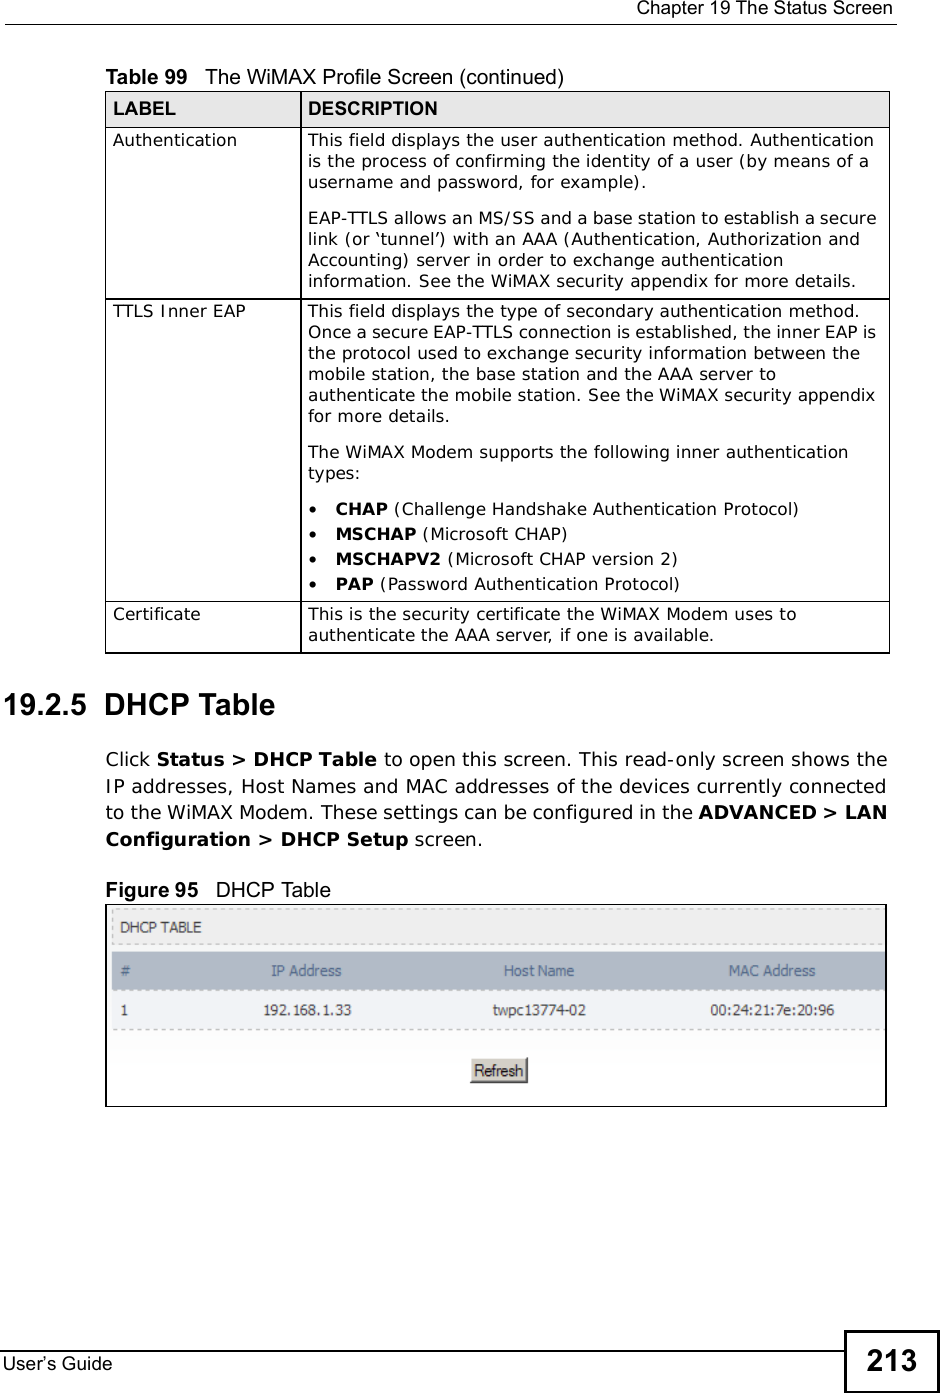  Chapter 19The Status ScreenUser s Guide 21319.2.5  DHCP TableClick Status &gt; DHCP Table to open this screen. This read-only screen shows the IP addresses, Host Names and MAC addresses of the devices currently connected to the WiMAX Modem. These settings can be configured in the ADVANCED &gt; LAN Configuration &gt; DHCP Setup screen.Figure 95   DHCP TableAuthenticationThis field displays the user authentication method. Authentication is the process of confirming the identity of a user (by means of a username and password, for example).EAP-TTLS allows an MS/SS and a base station to establish a secure link (or ‘tunnel’) with an AAA (Authentication, Authorization and Accounting) server in order to exchange authentication information. See the WiMAX security appendix for more details.TTLS Inner EAPThis field displays the type of secondary authentication method. Once a secure EAP-TTLS connection is established, the inner EAP is the protocol used to exchange security information between the mobile station, the base station and the AAA server to authenticate the mobile station. See the WiMAX security appendix for more details.The WiMAX Modem supports the following inner authentication types:•CHAP (Challenge Handshake Authentication Protocol)•MSCHAP (Microsoft CHAP)•MSCHAPV2 (Microsoft CHAP version 2)•PAP (Password Authentication Protocol)CertificateThis is the security certificate the WiMAX Modem uses to authenticate the AAA server, if one is available.Table 99   The WiMAX Profile Screen (continued)LABEL DESCRIPTION